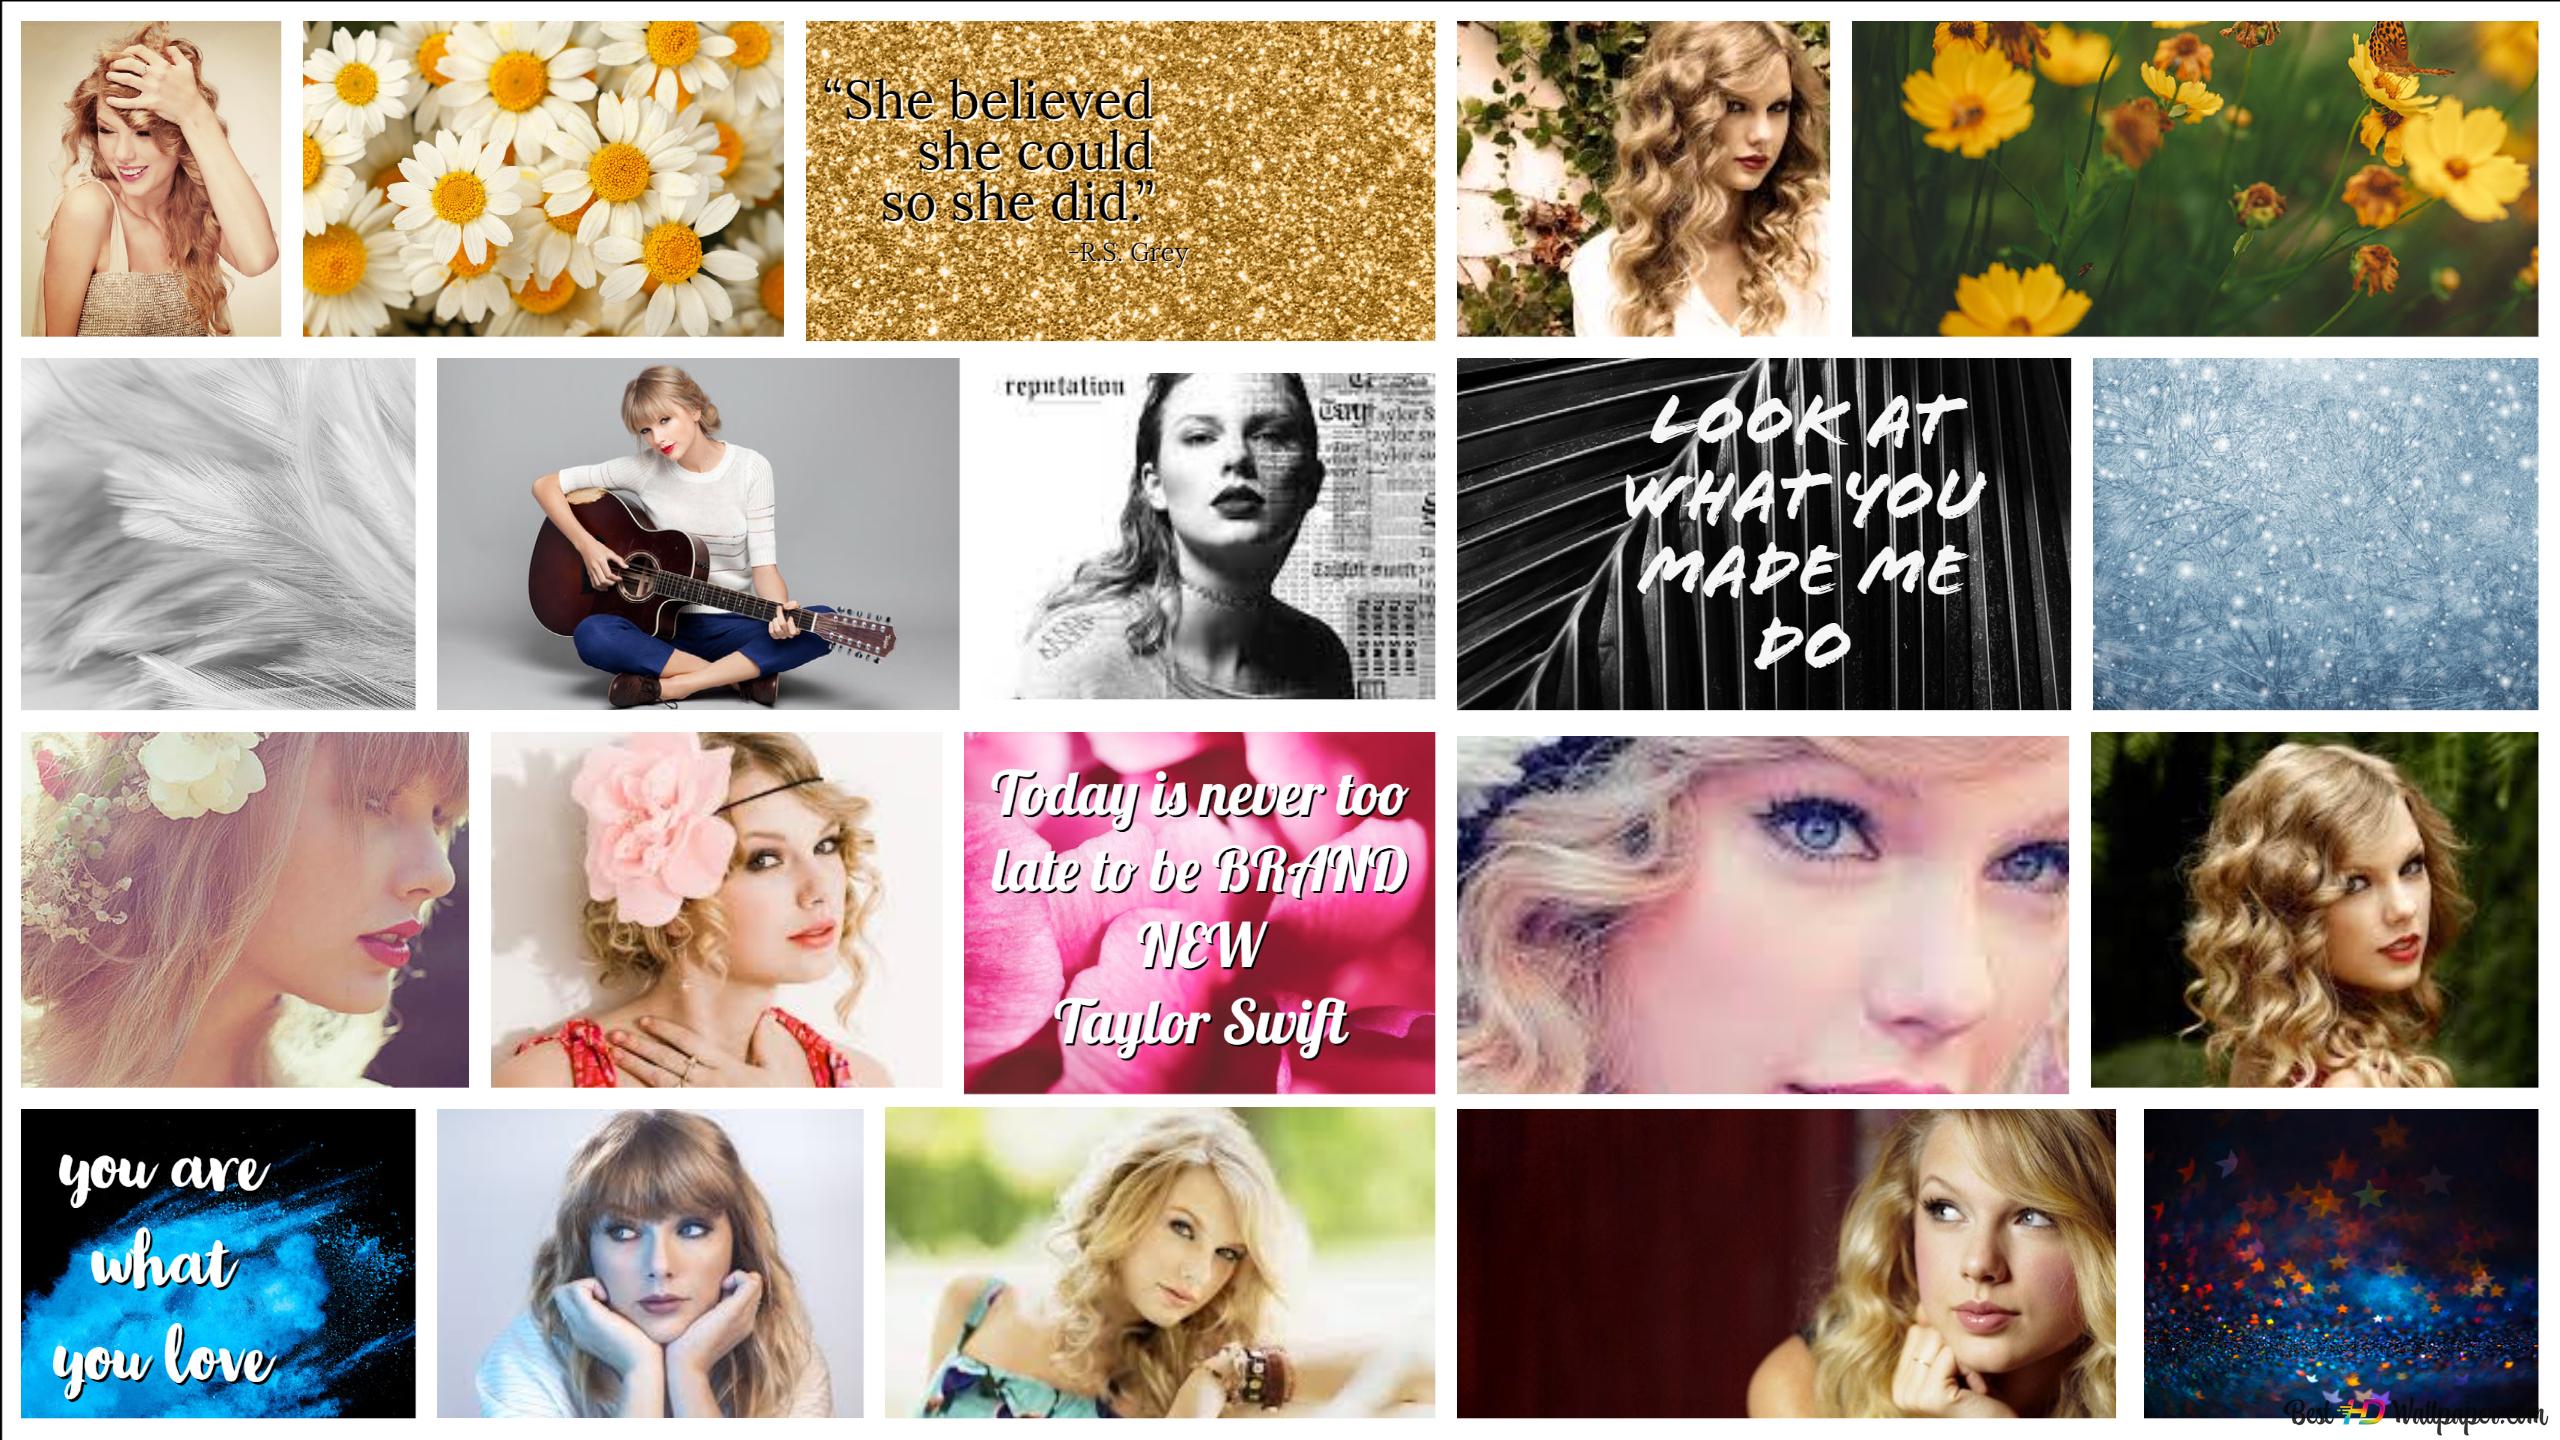 Ttaylor swift aesthetic background collage and quotes k wallpaper download